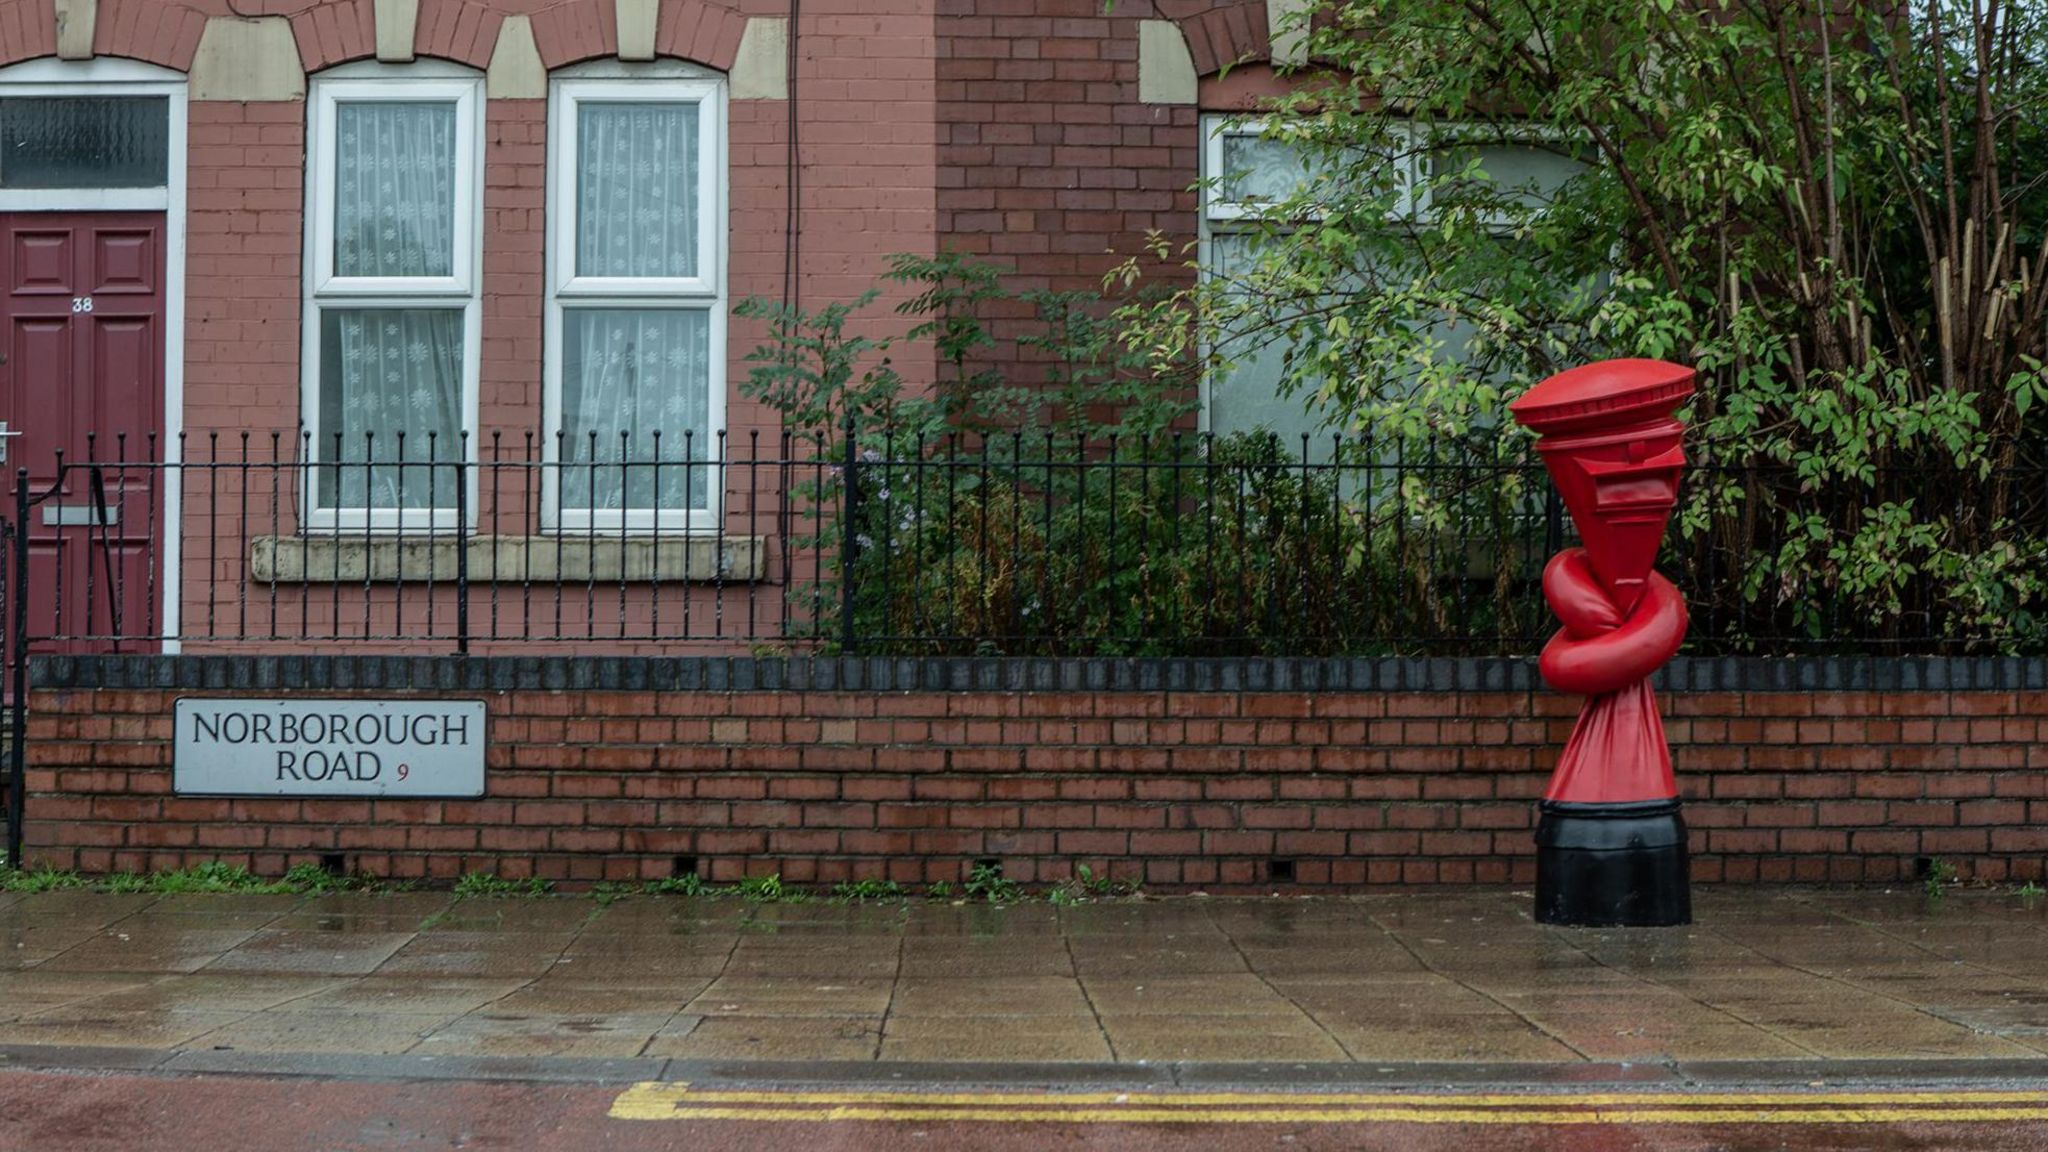 A post box tied in a knot by artist Alex Chinneck